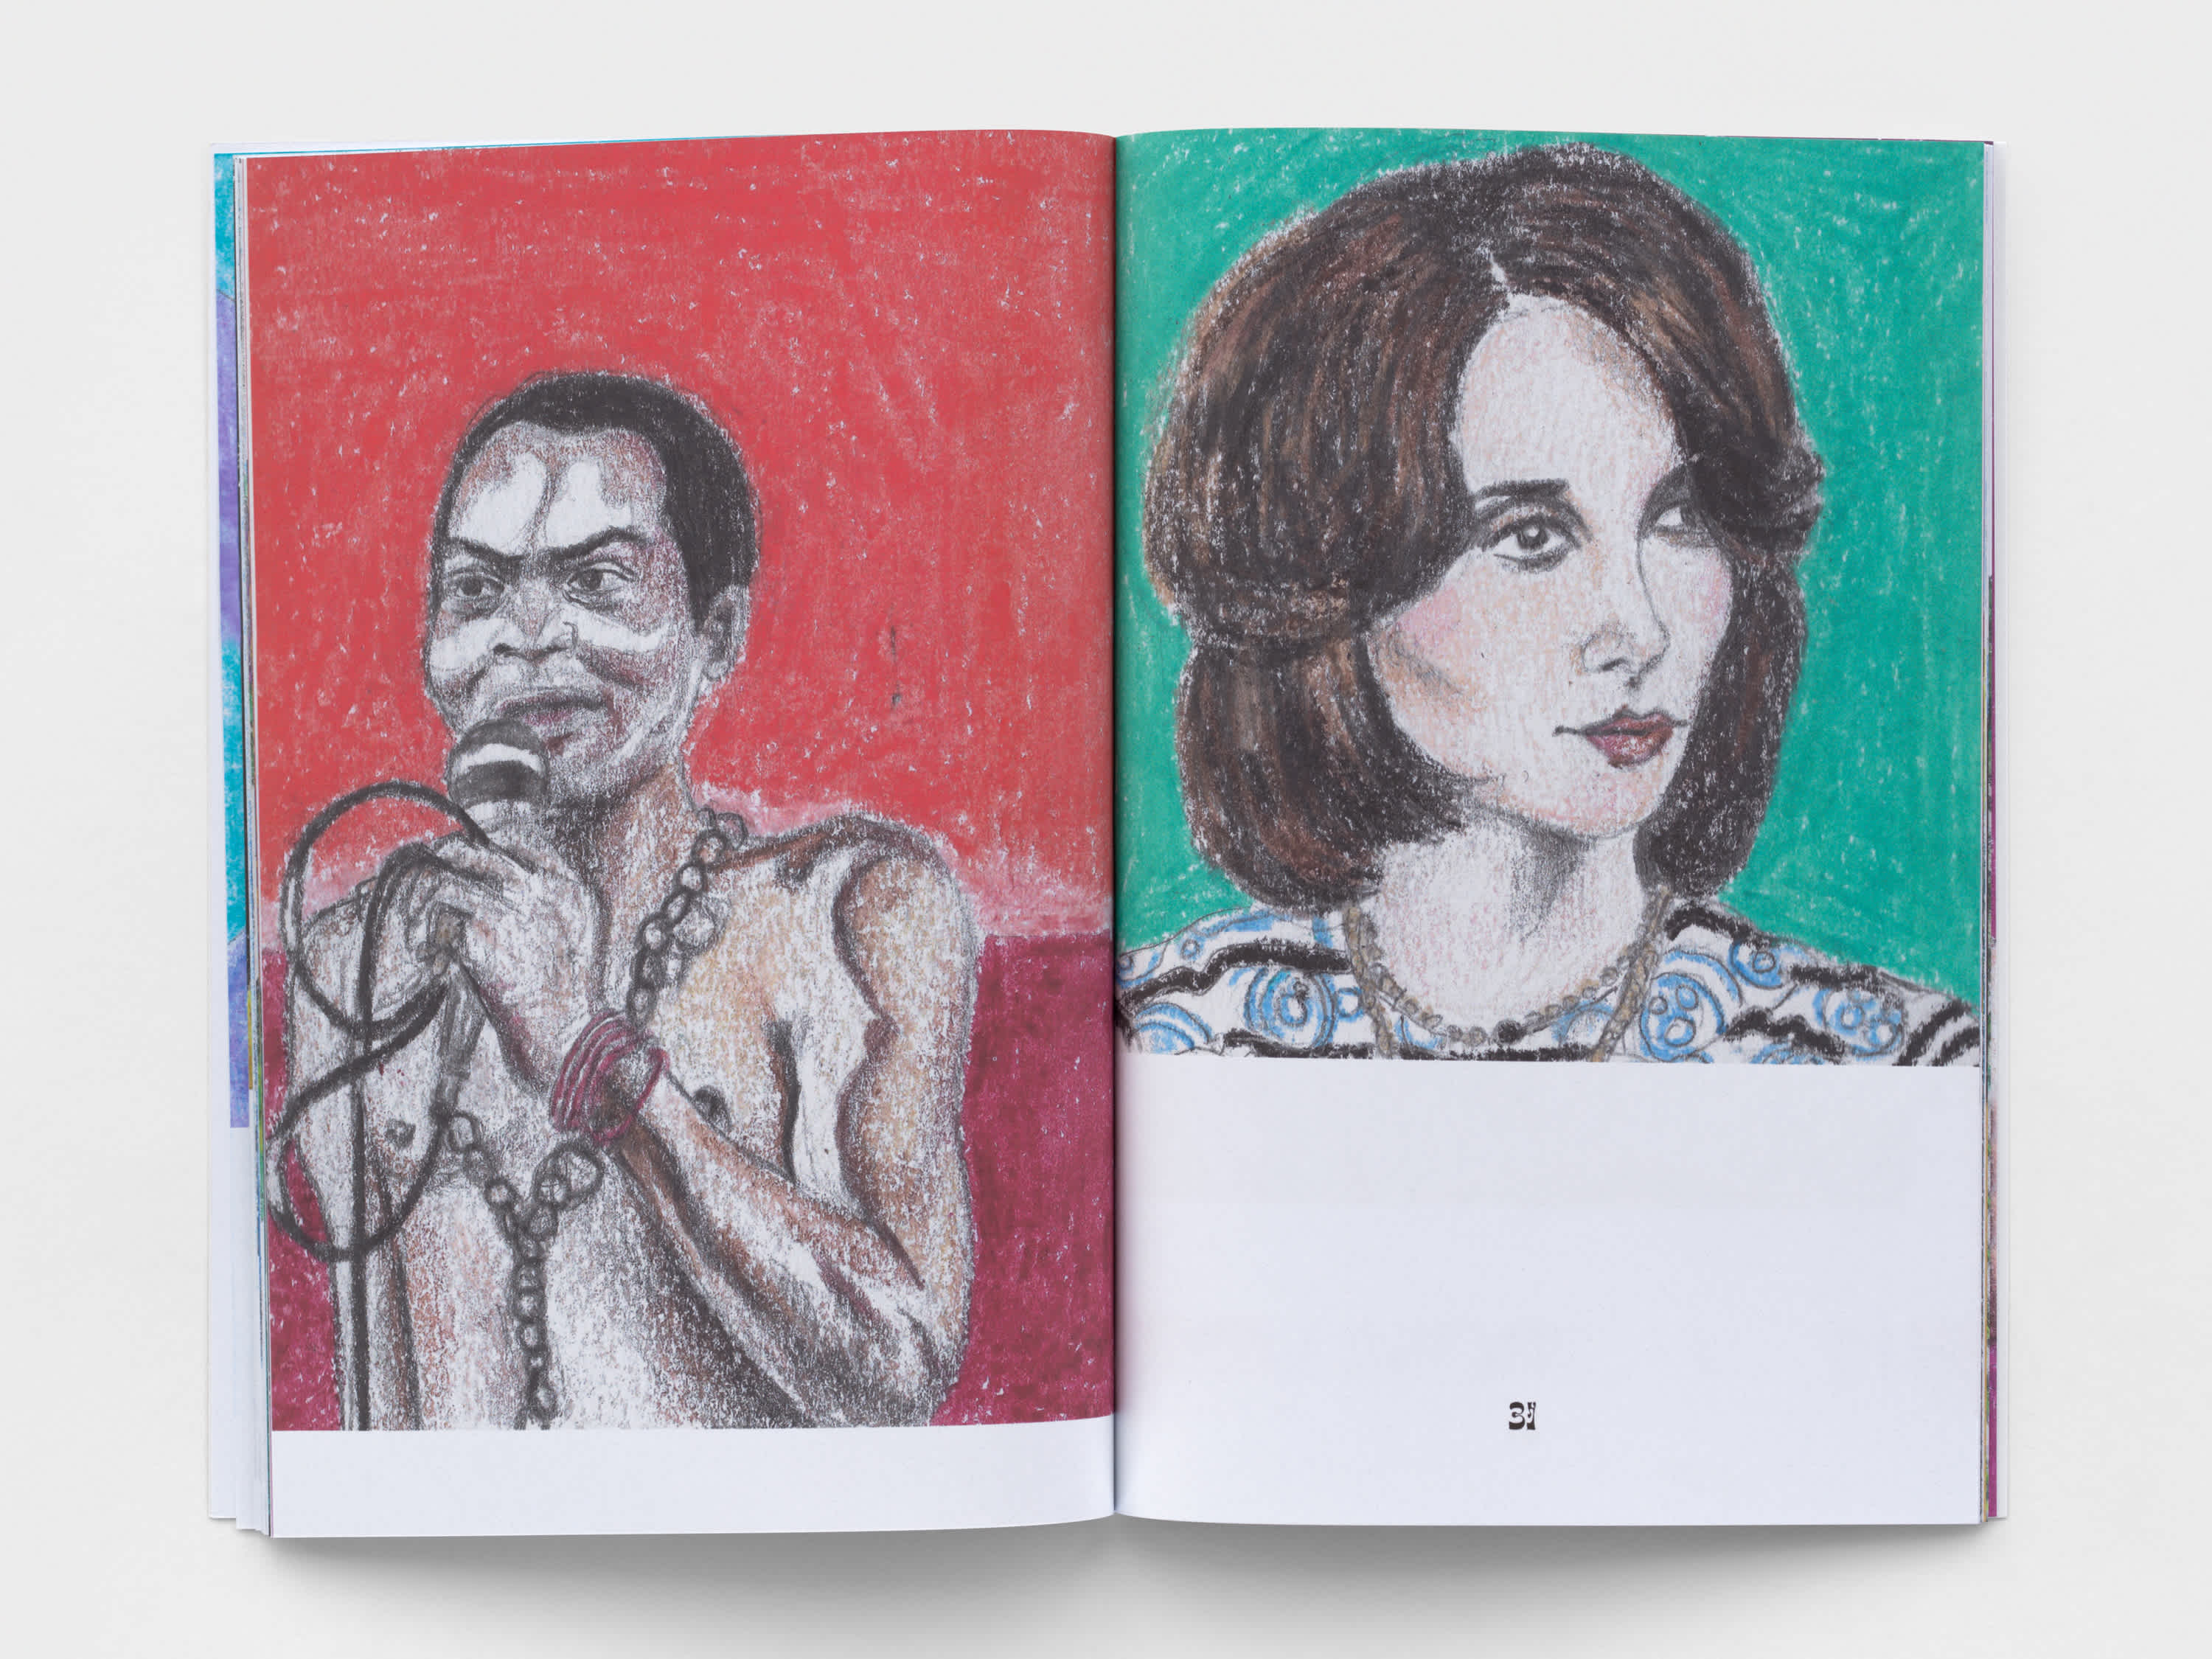 An open book that shows a crayon drawing on each page. The left page is a depiction of Fela Kuti in front of a red background. The right drawing shows Fairuz on a teal background.